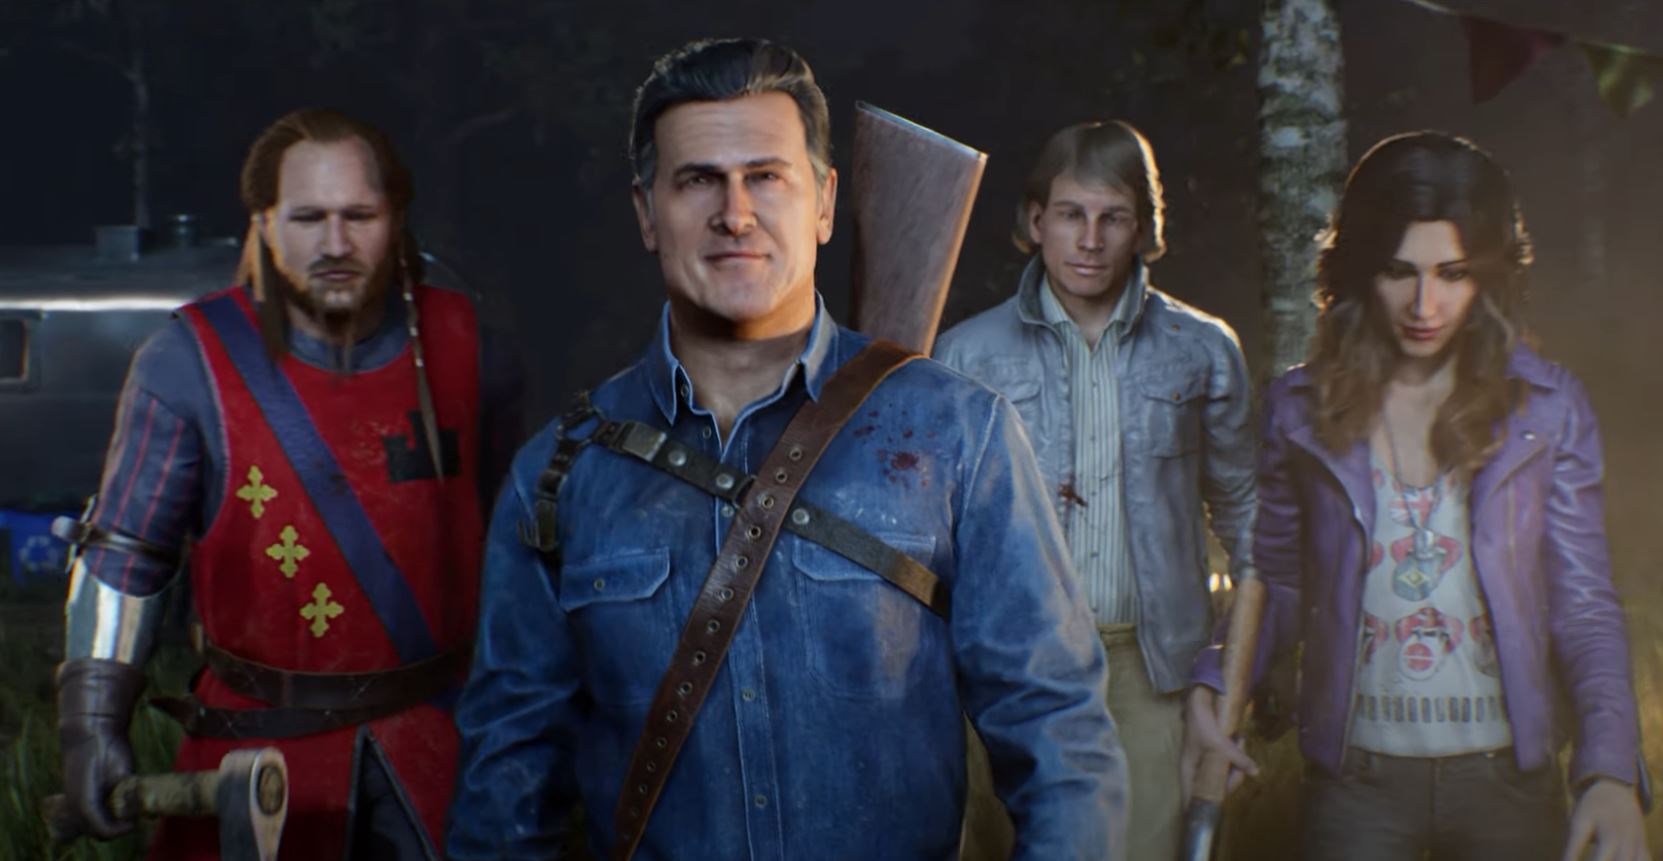 Evil Dead: The Game' Is Brilliantly Gory In New Gameplay Trailer